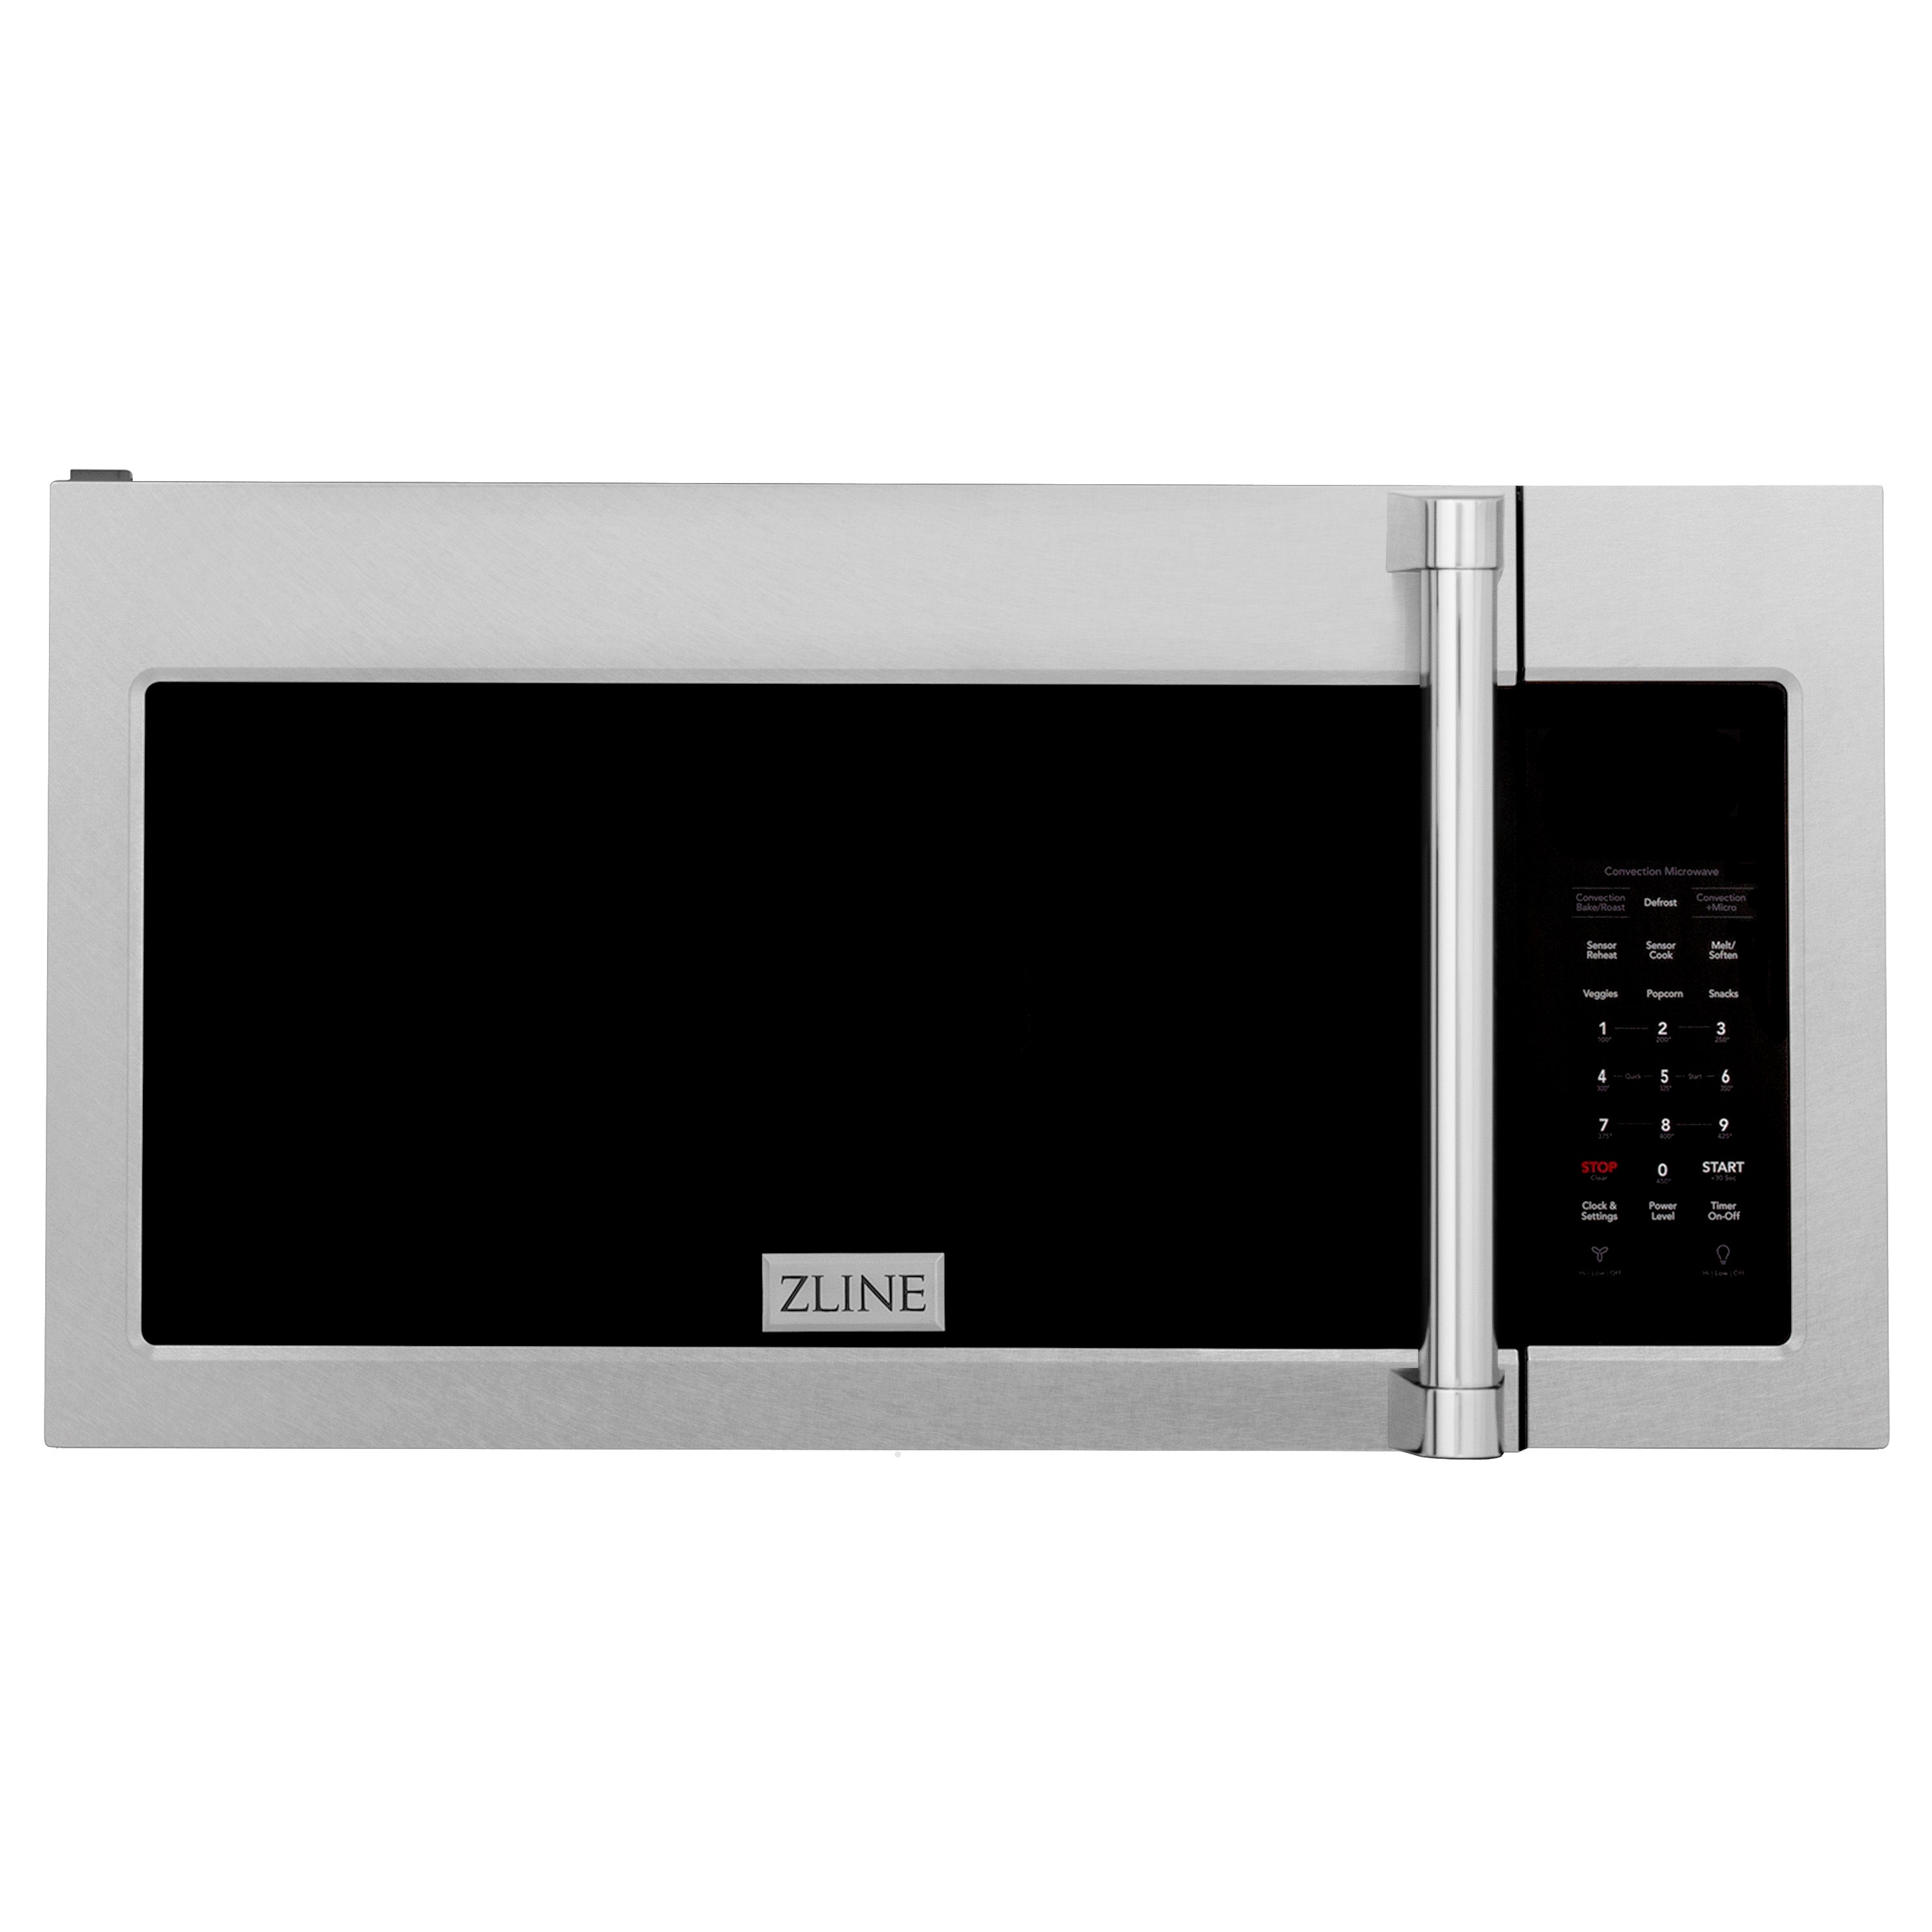 ZLINE 1.5 cu. ft. Over the Range Convection Microwave Oven in Fingerprint Resistant Stainless Steel with Traditional Handle and Sensor Cooking